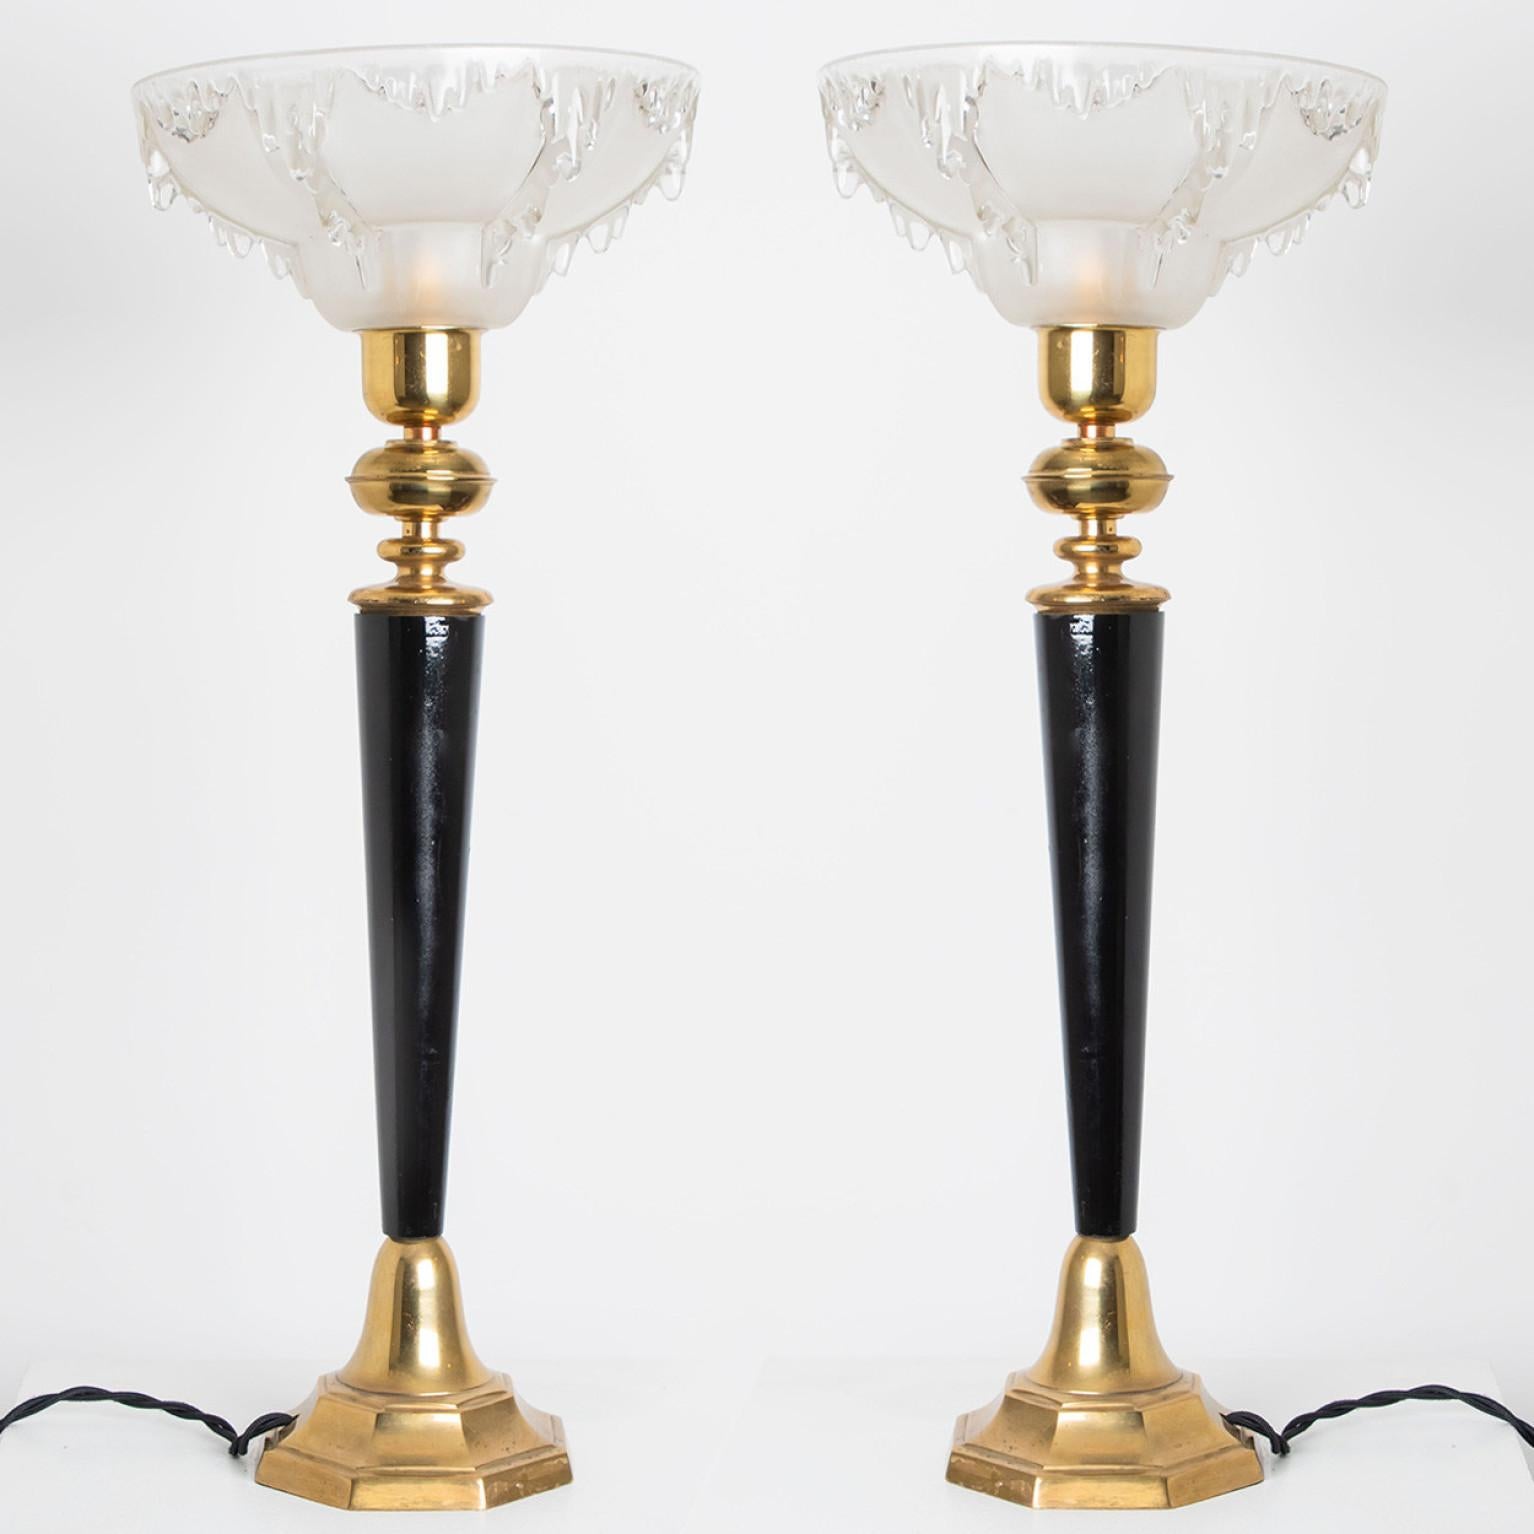 Two very elegant table lamps, manufatured by the french master glass manufacturer Ezan. Made around 1930 in Europe, France.
It's a beautiful brass and wood edition.

The french opalescent glass 